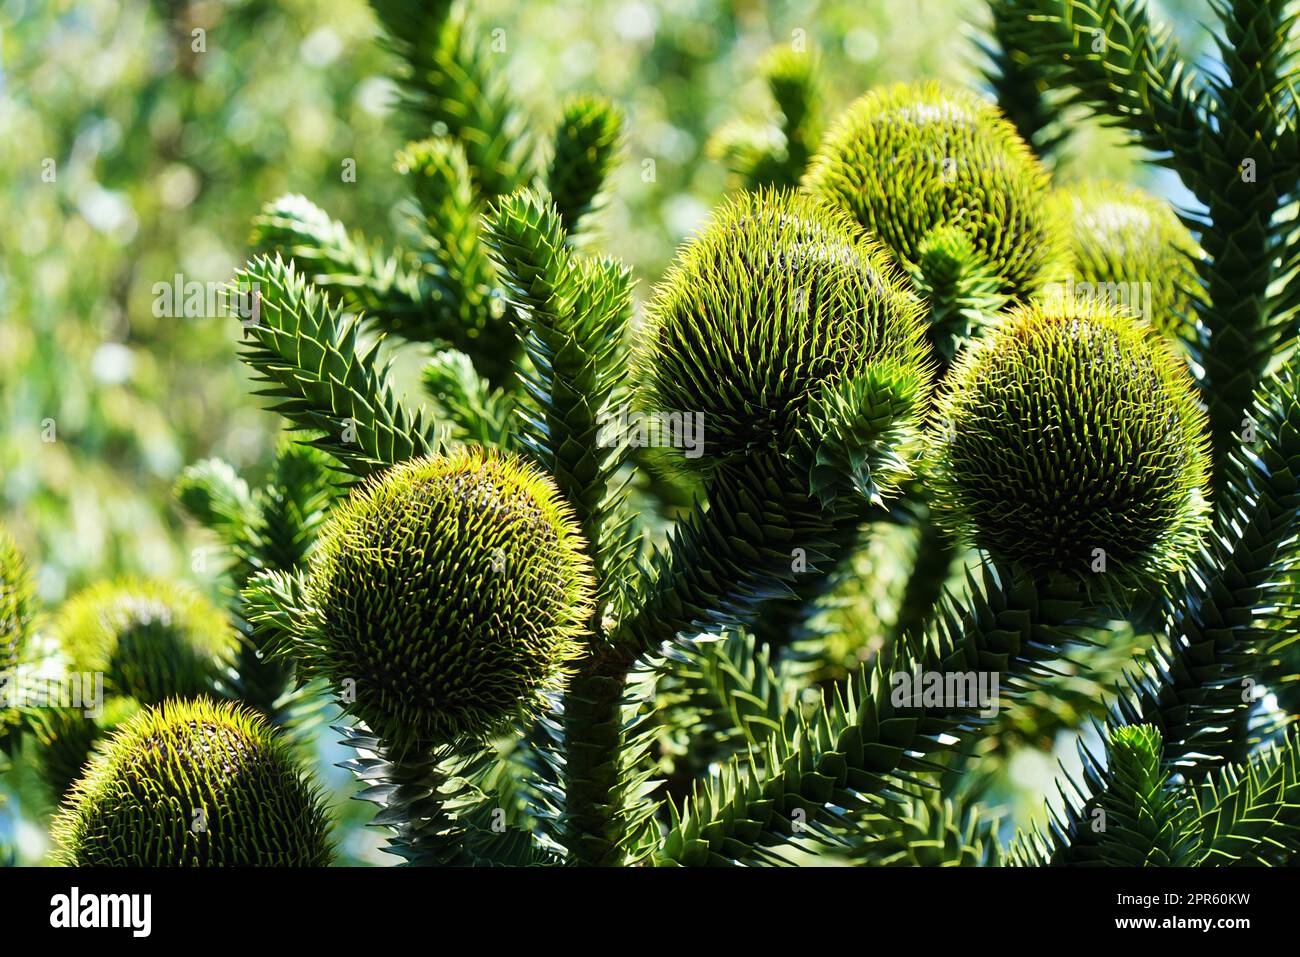 Chilean fir monkey puzzle tree under blue sky in summer Stock Photo